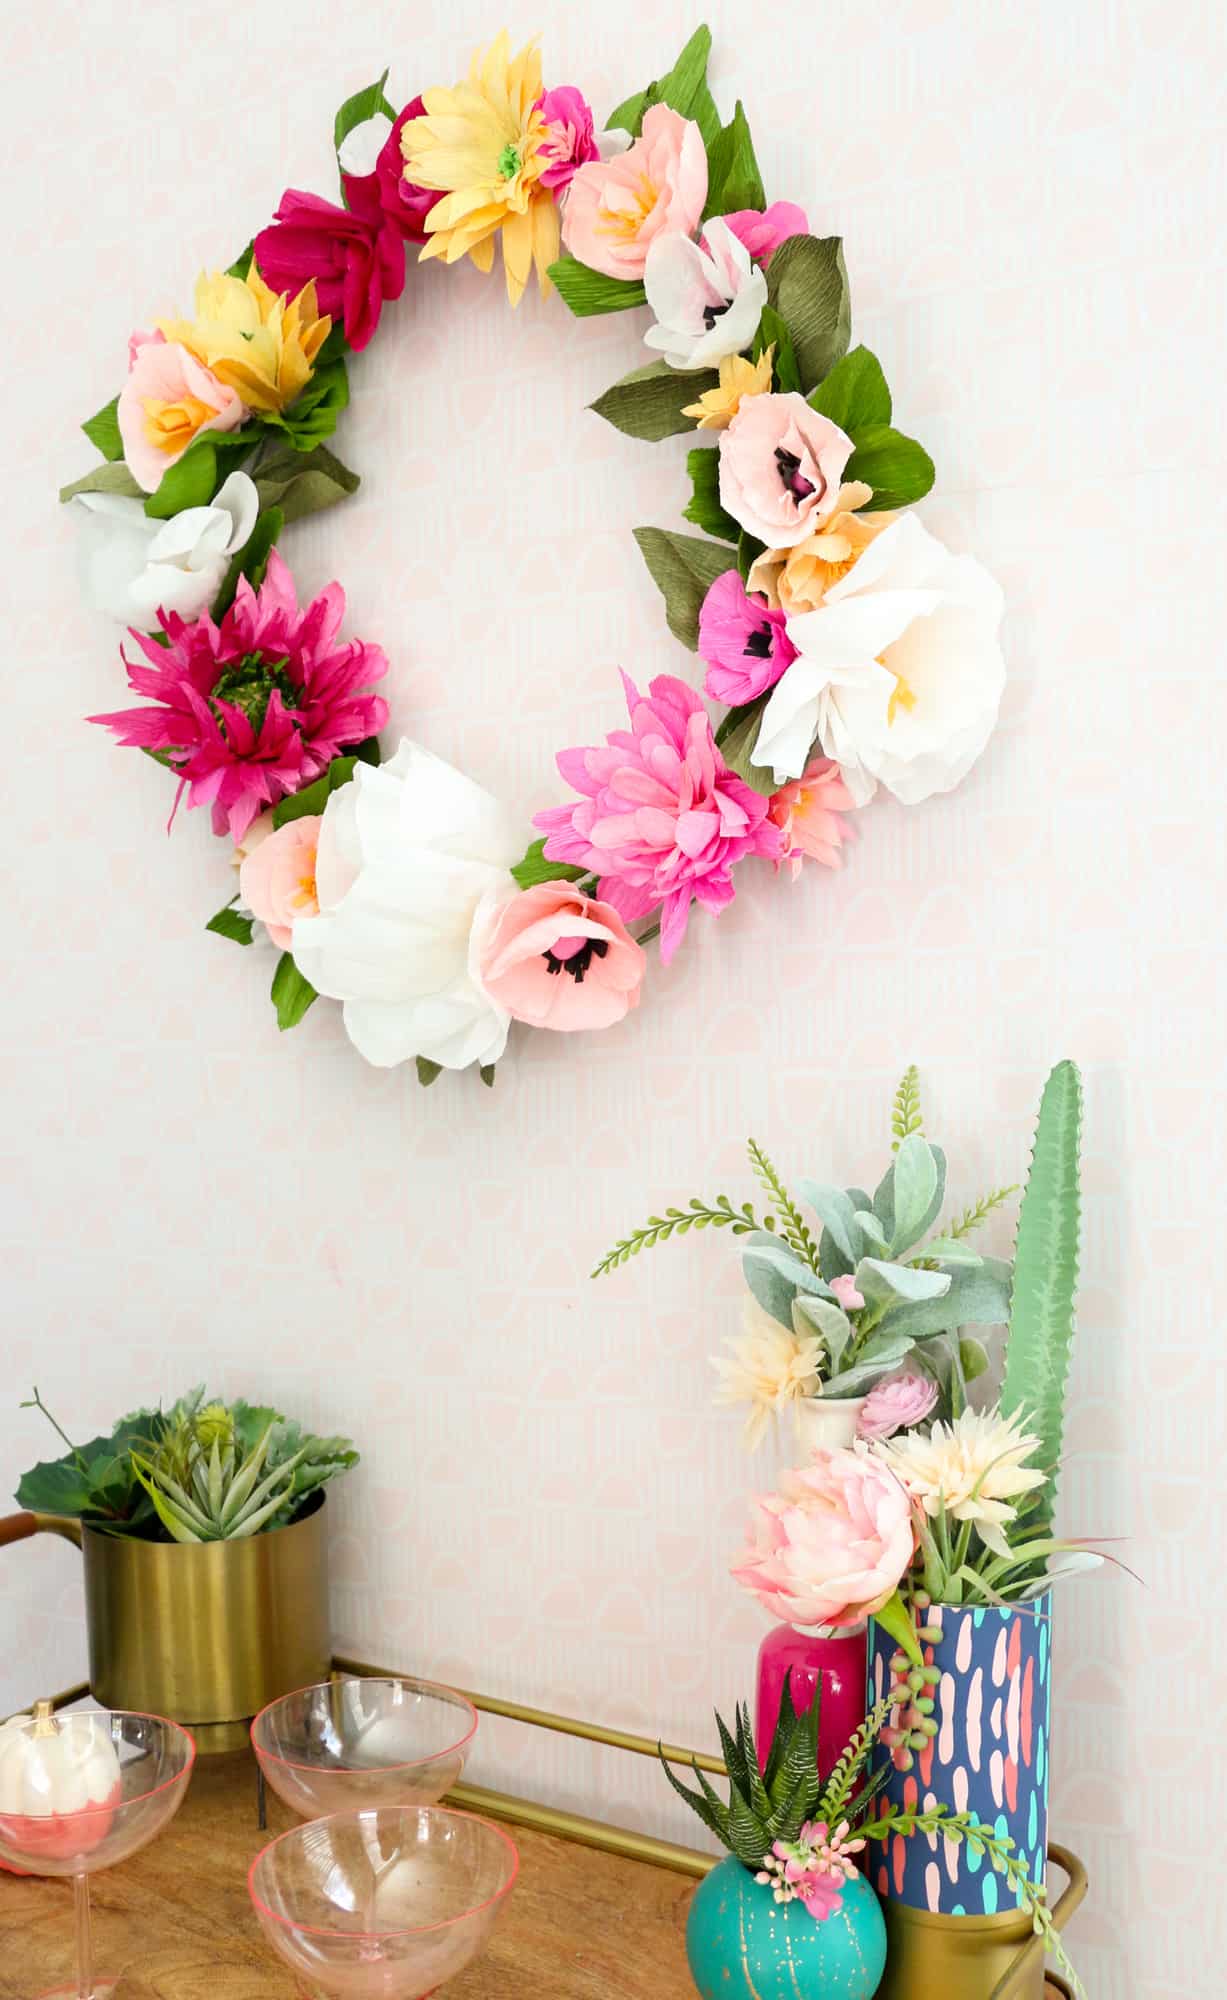 How to Make a Paper Flower Wreath